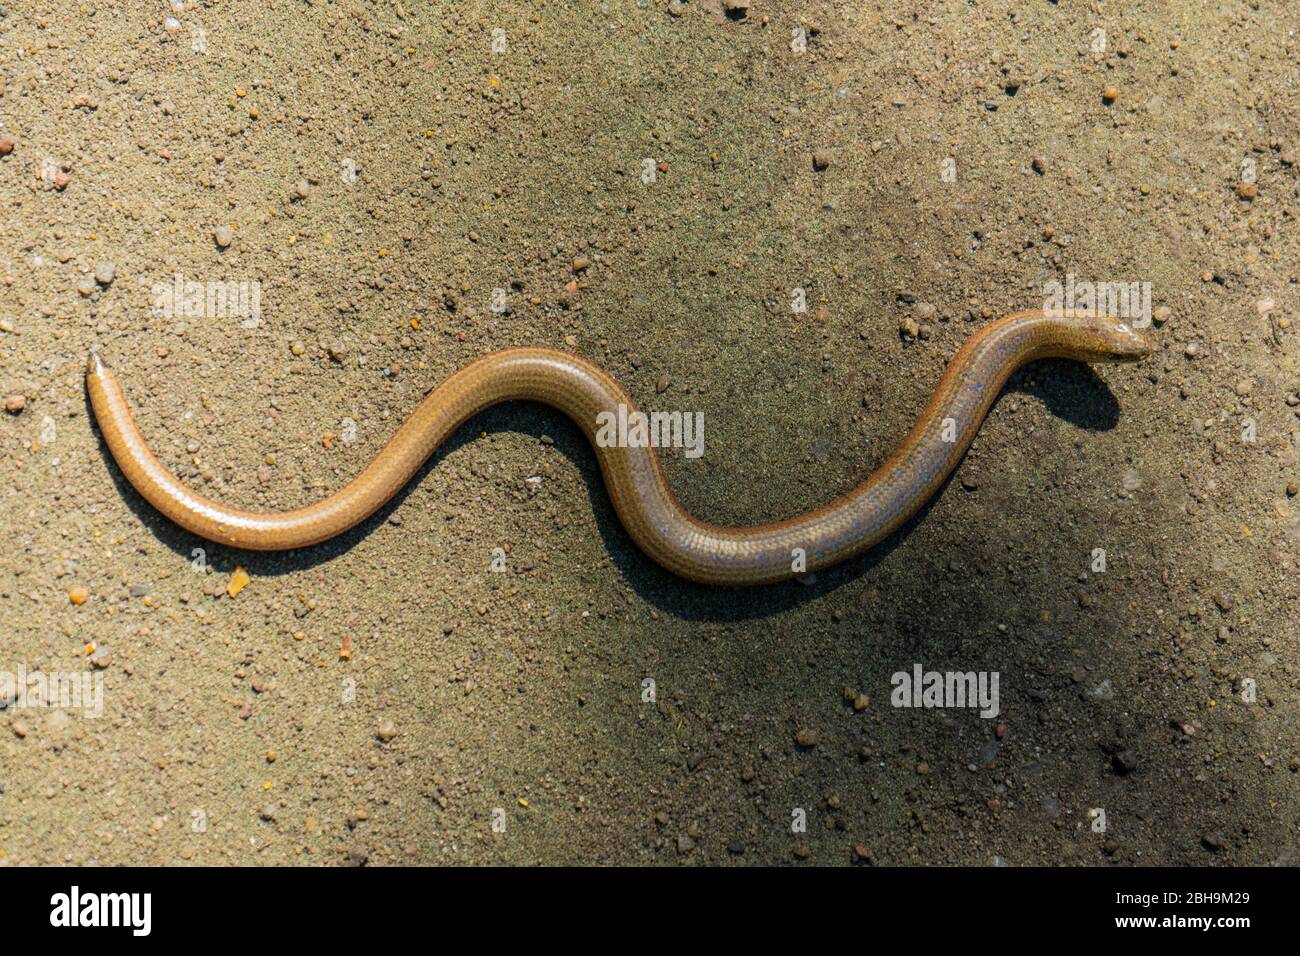 blindworm sunning itself on a sandy road in the forest Stock Photo